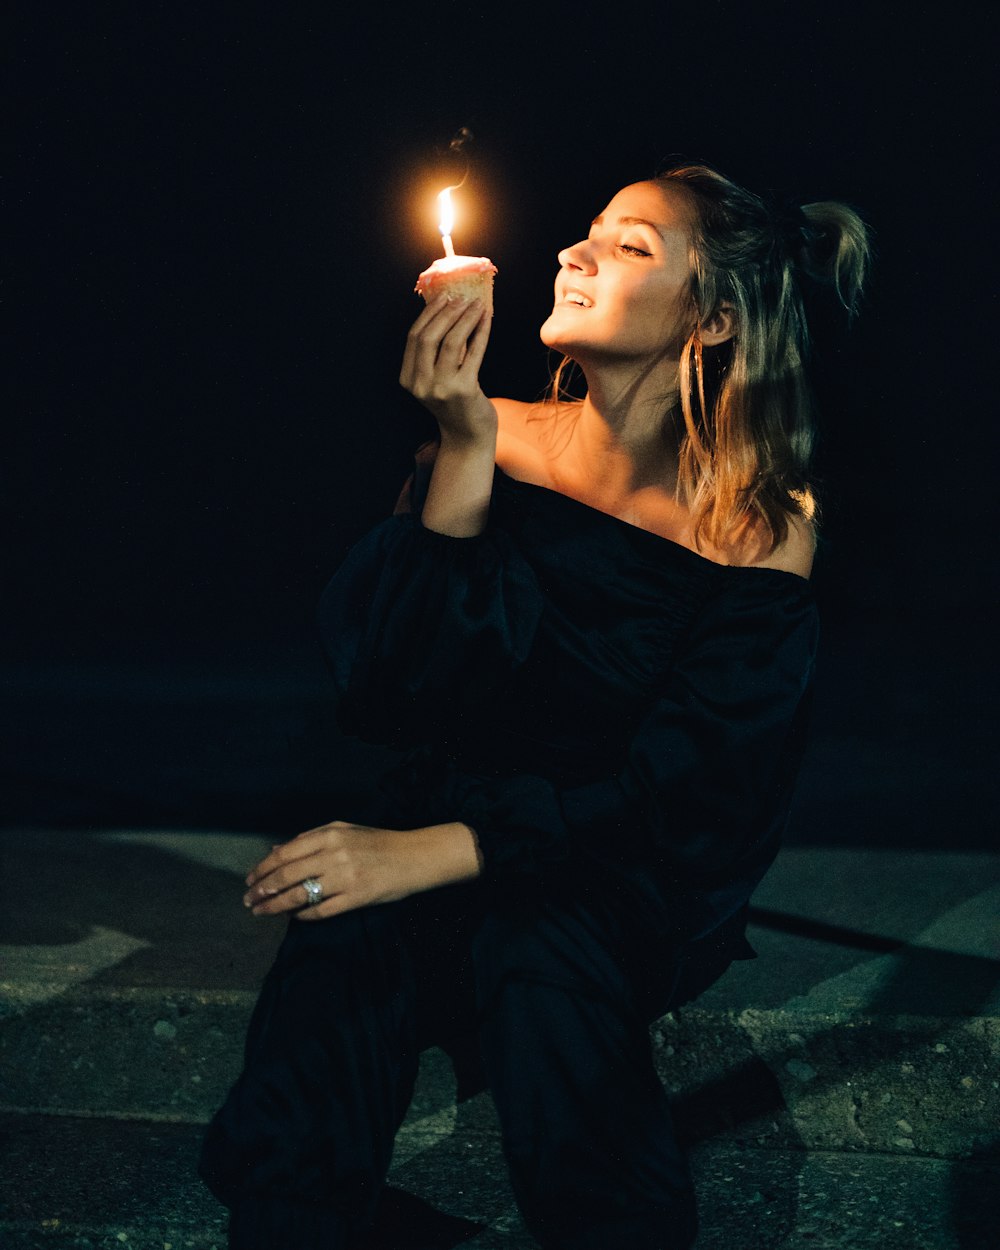 woman in black dress holding lighted candle